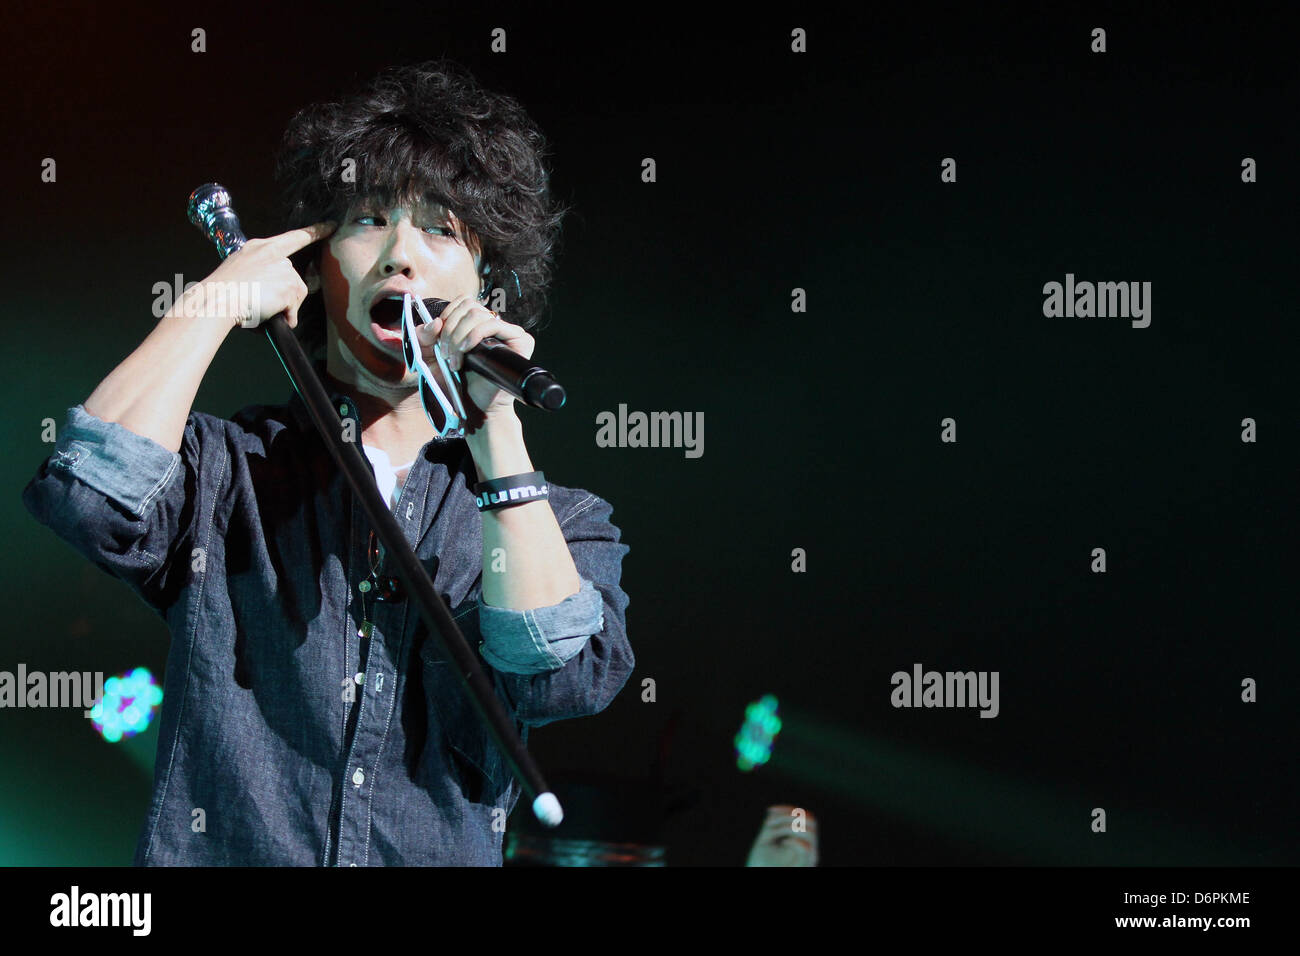 Jin Akanishi performing live at Vancouver's Centre for the performing arts Vancouver, Canada - 10.03.12 Stock Photo